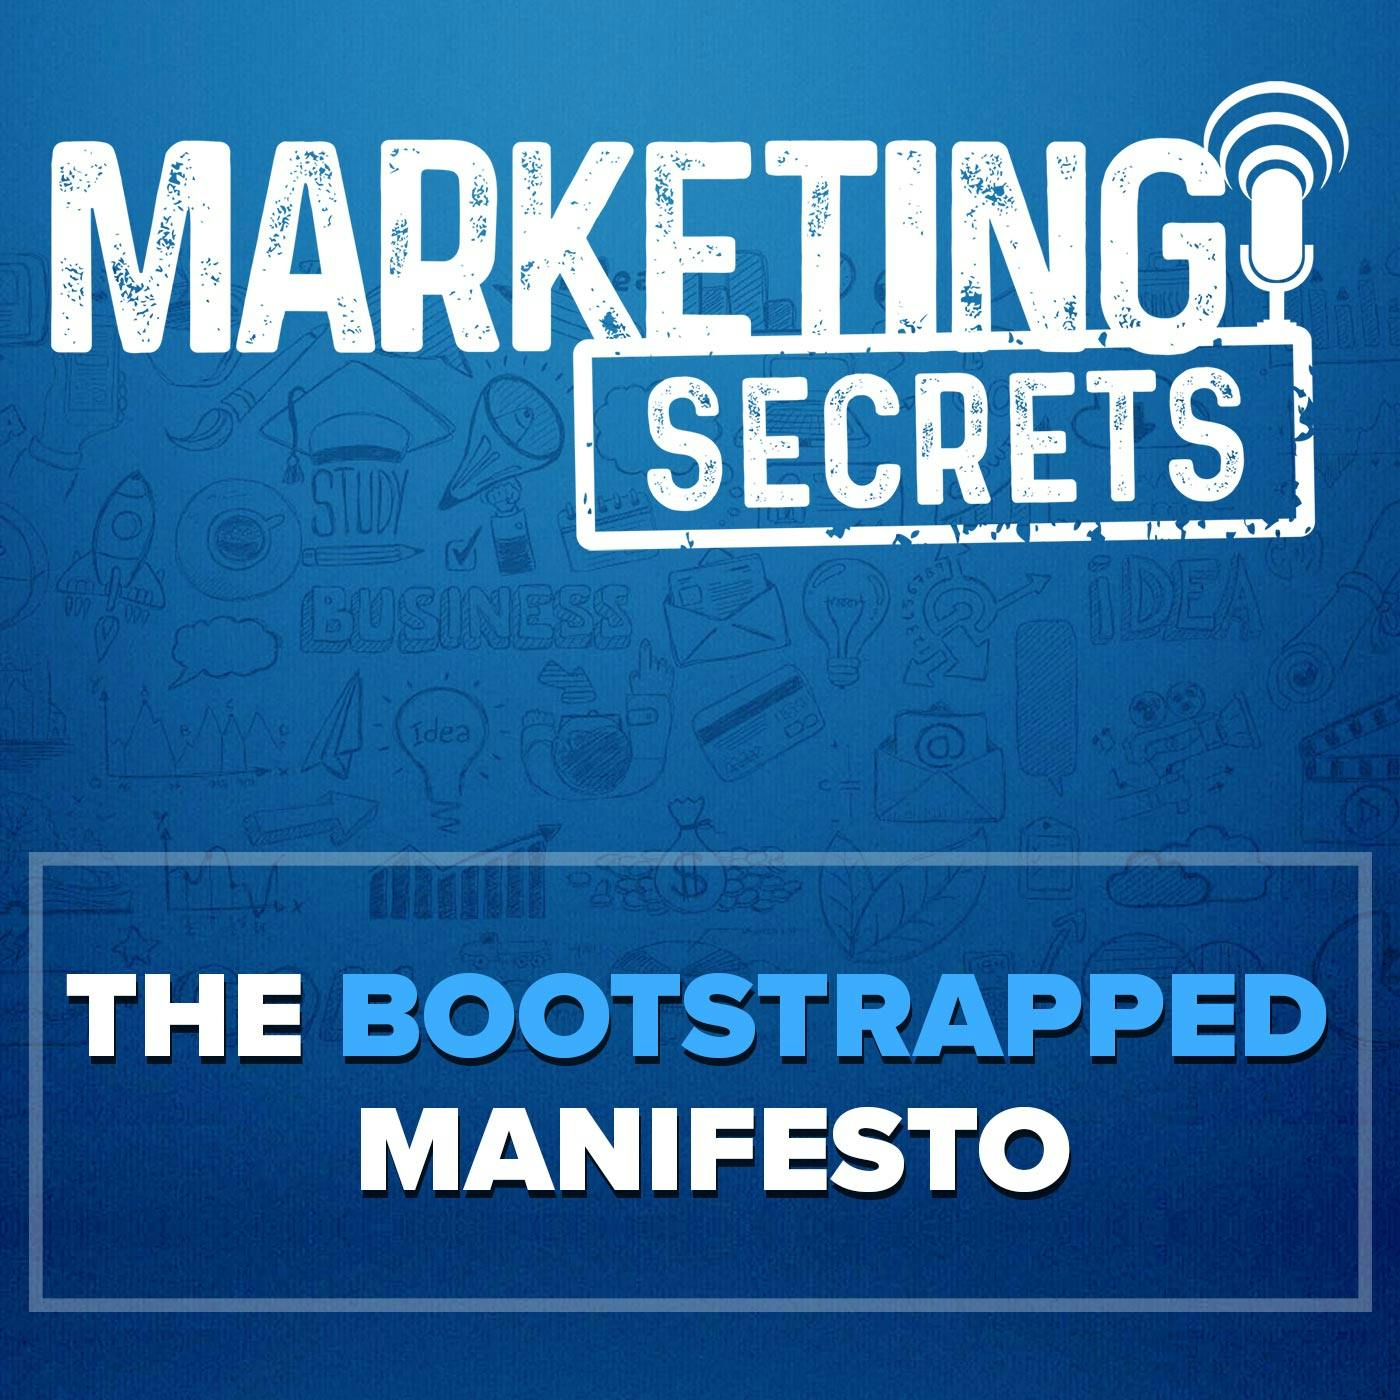 The Bootstrapped Manifesto